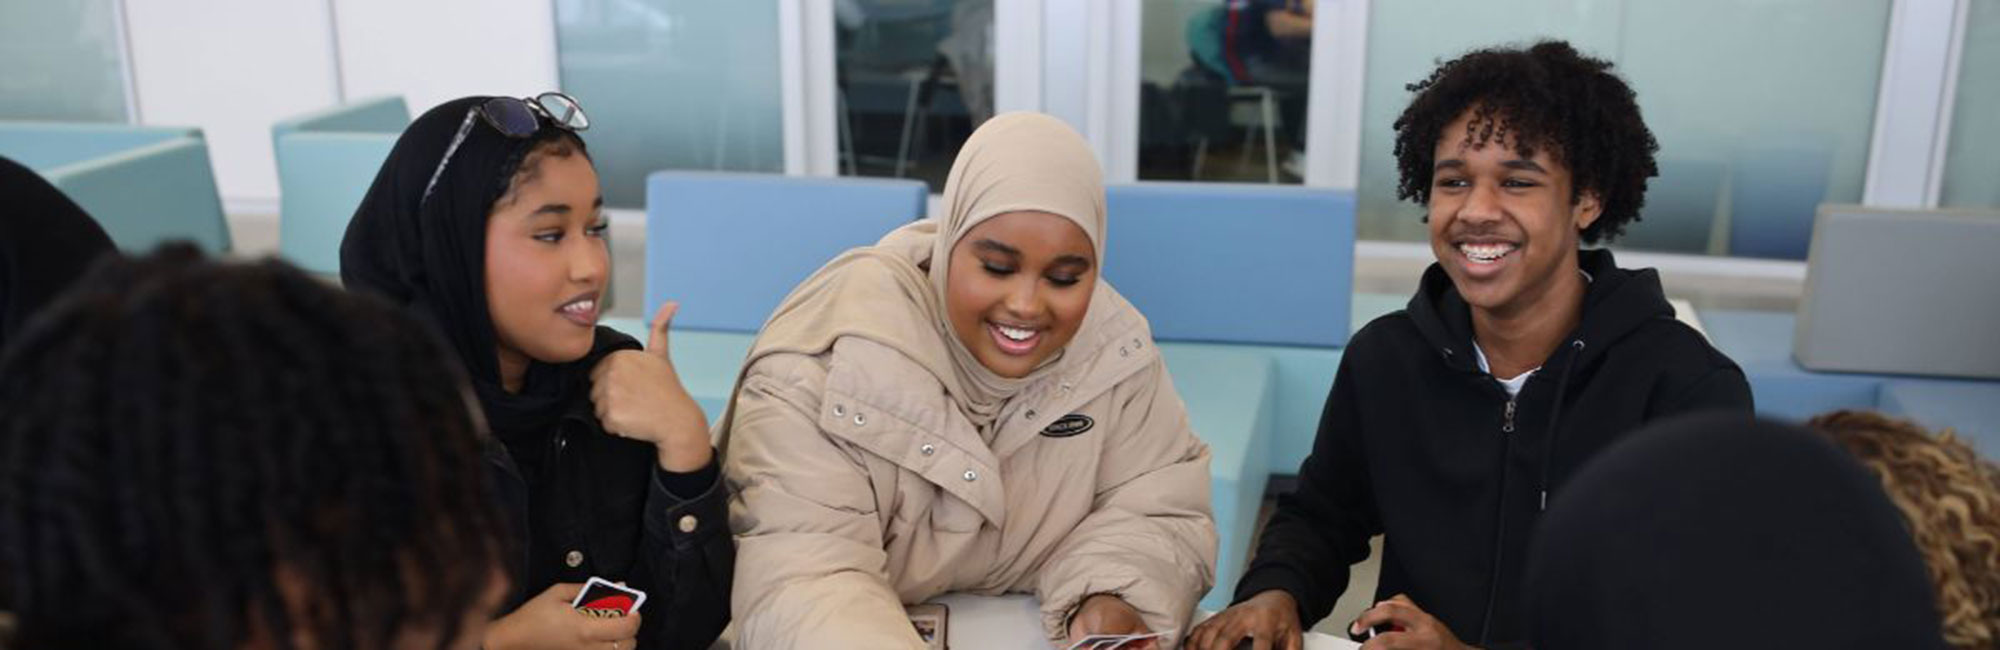 Black students smiling and using a laptop together in an office.